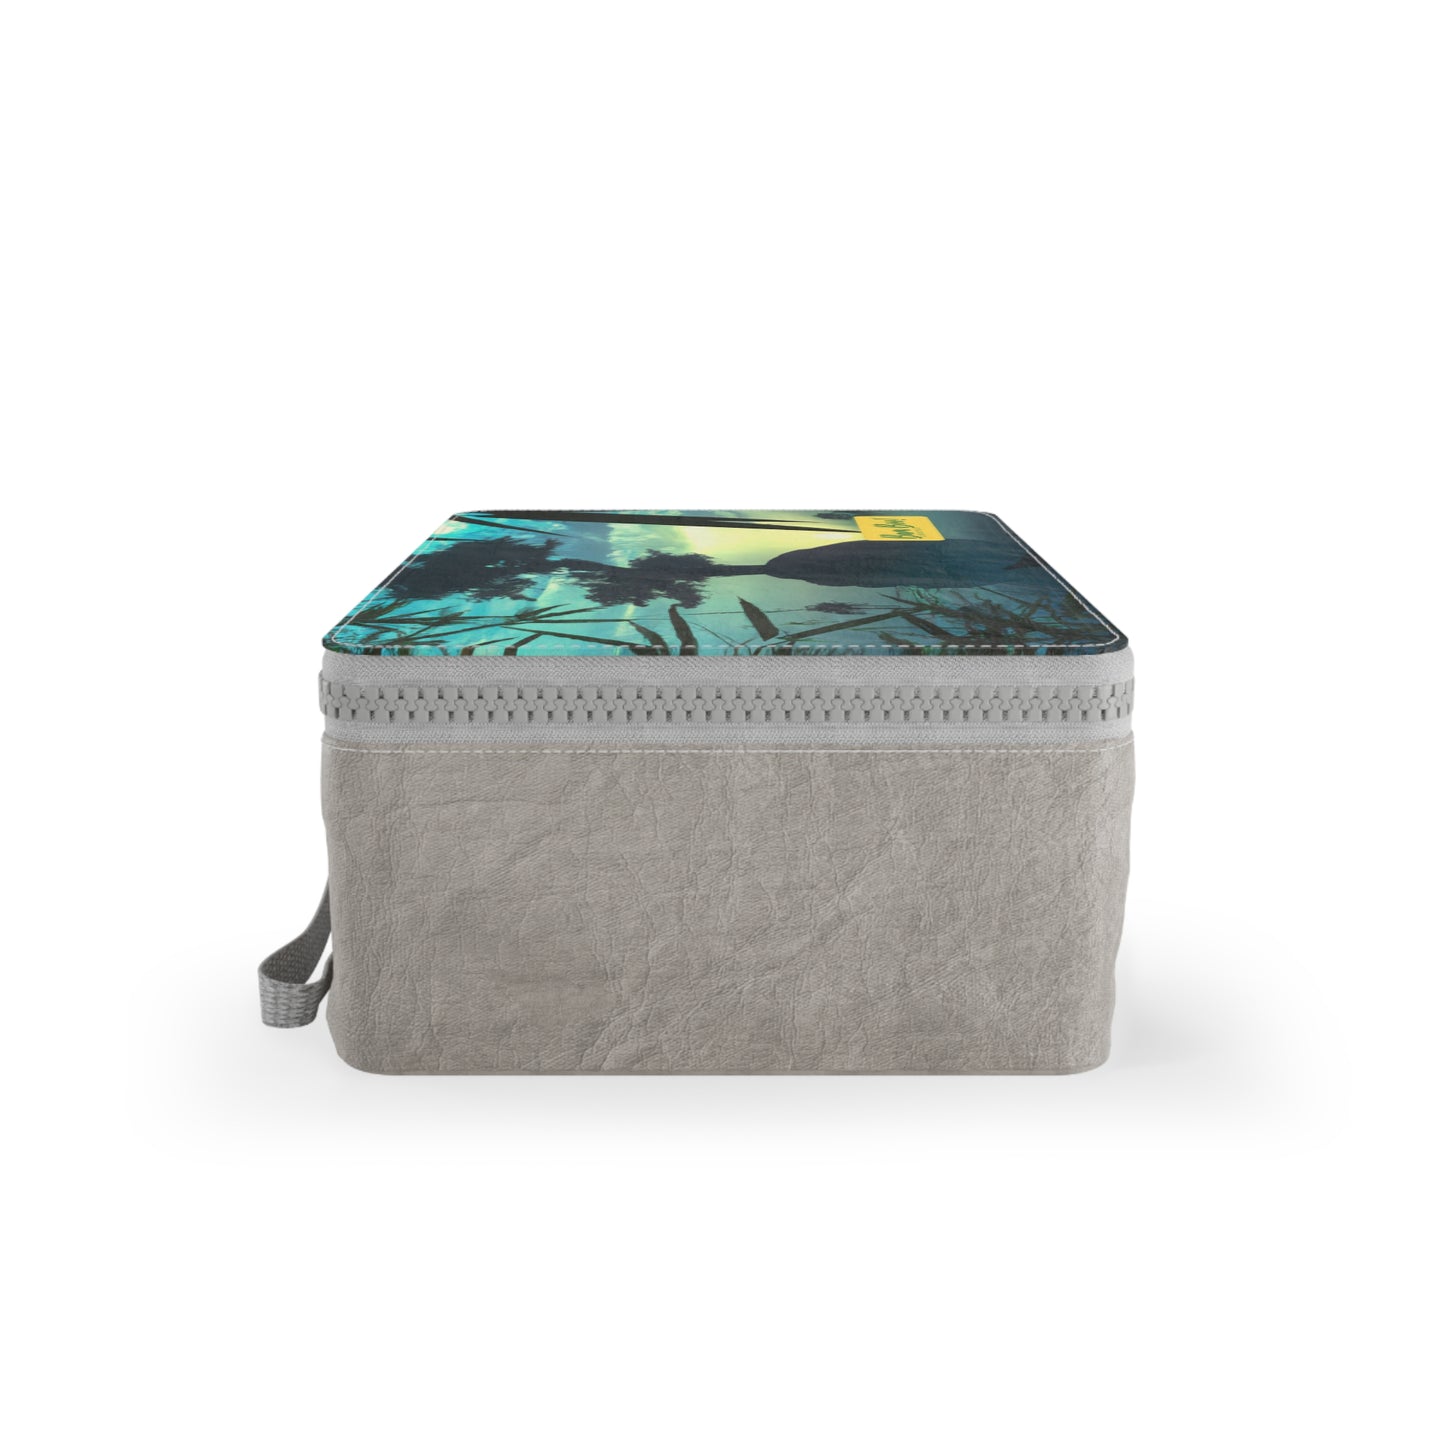 "The Art of Nature's Textures" - Bam Boo! Lifestyle Eco-friendly Paper Lunch Bag